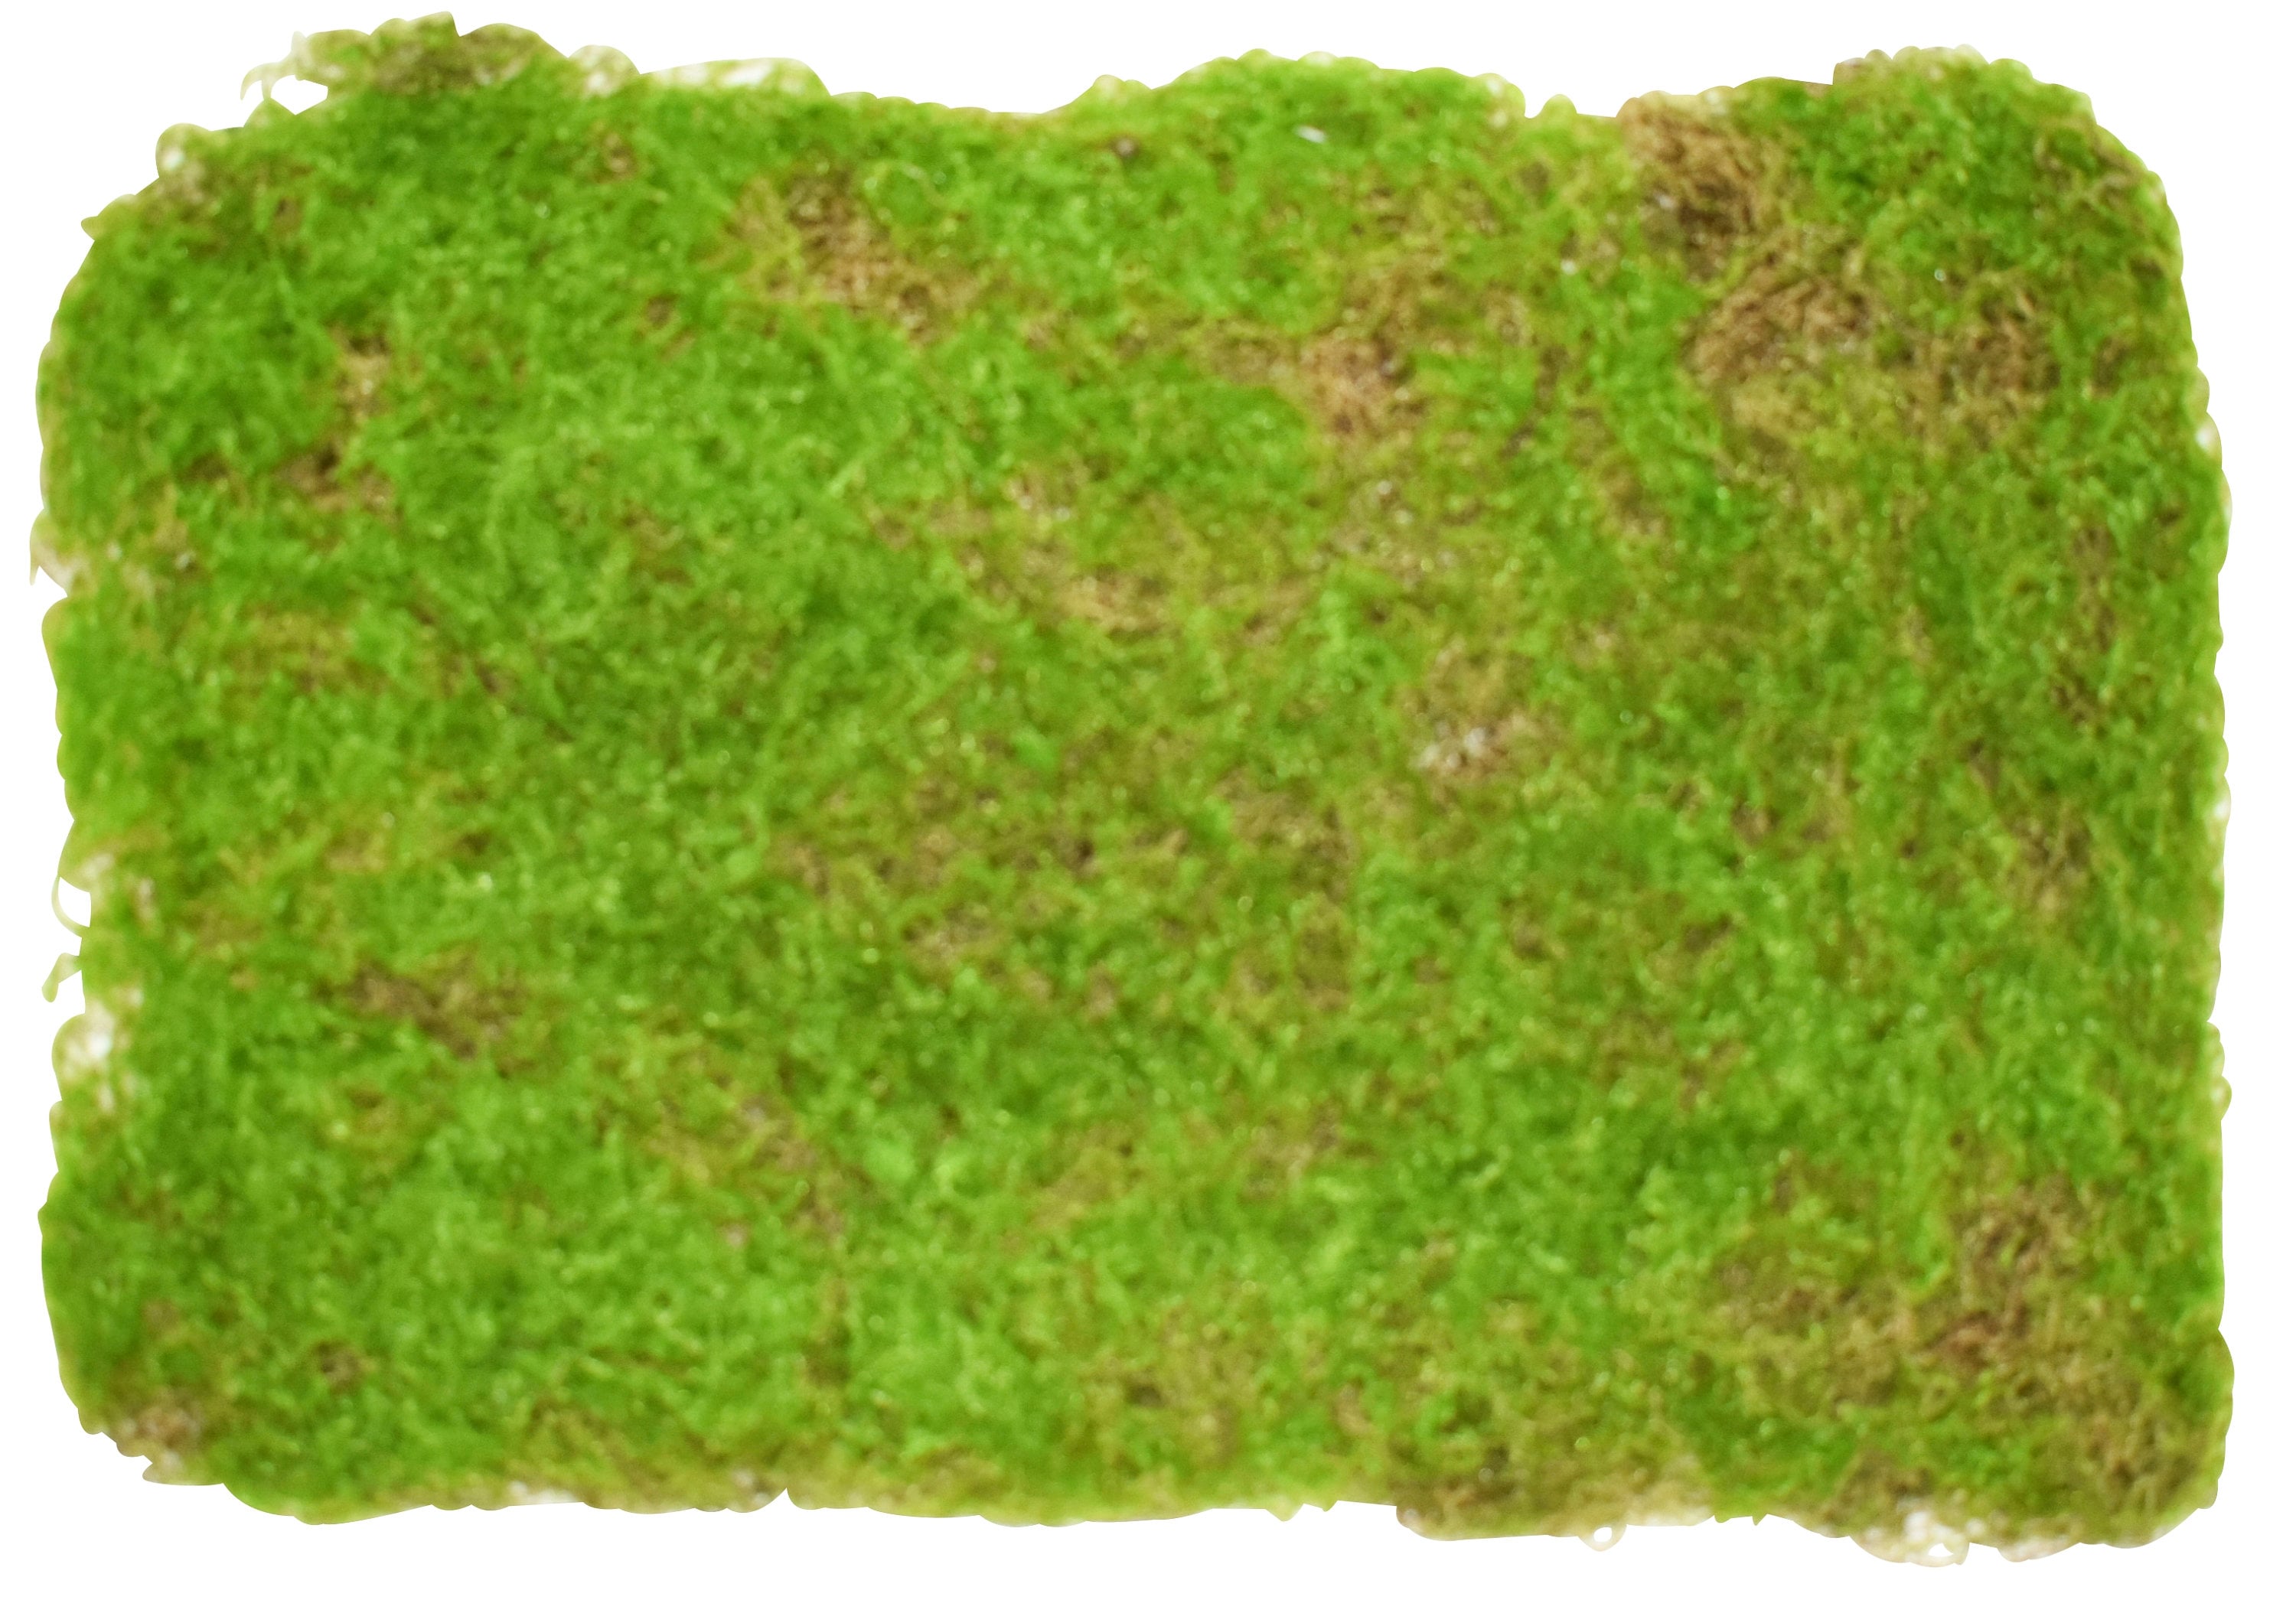 USMOLA Artificial Moss, 16OZ Fake Moss for Crafts, Decorative Moss for  Table Centerpieces Fairy Garden Wedding Party Decor, Faux Moss for Potted